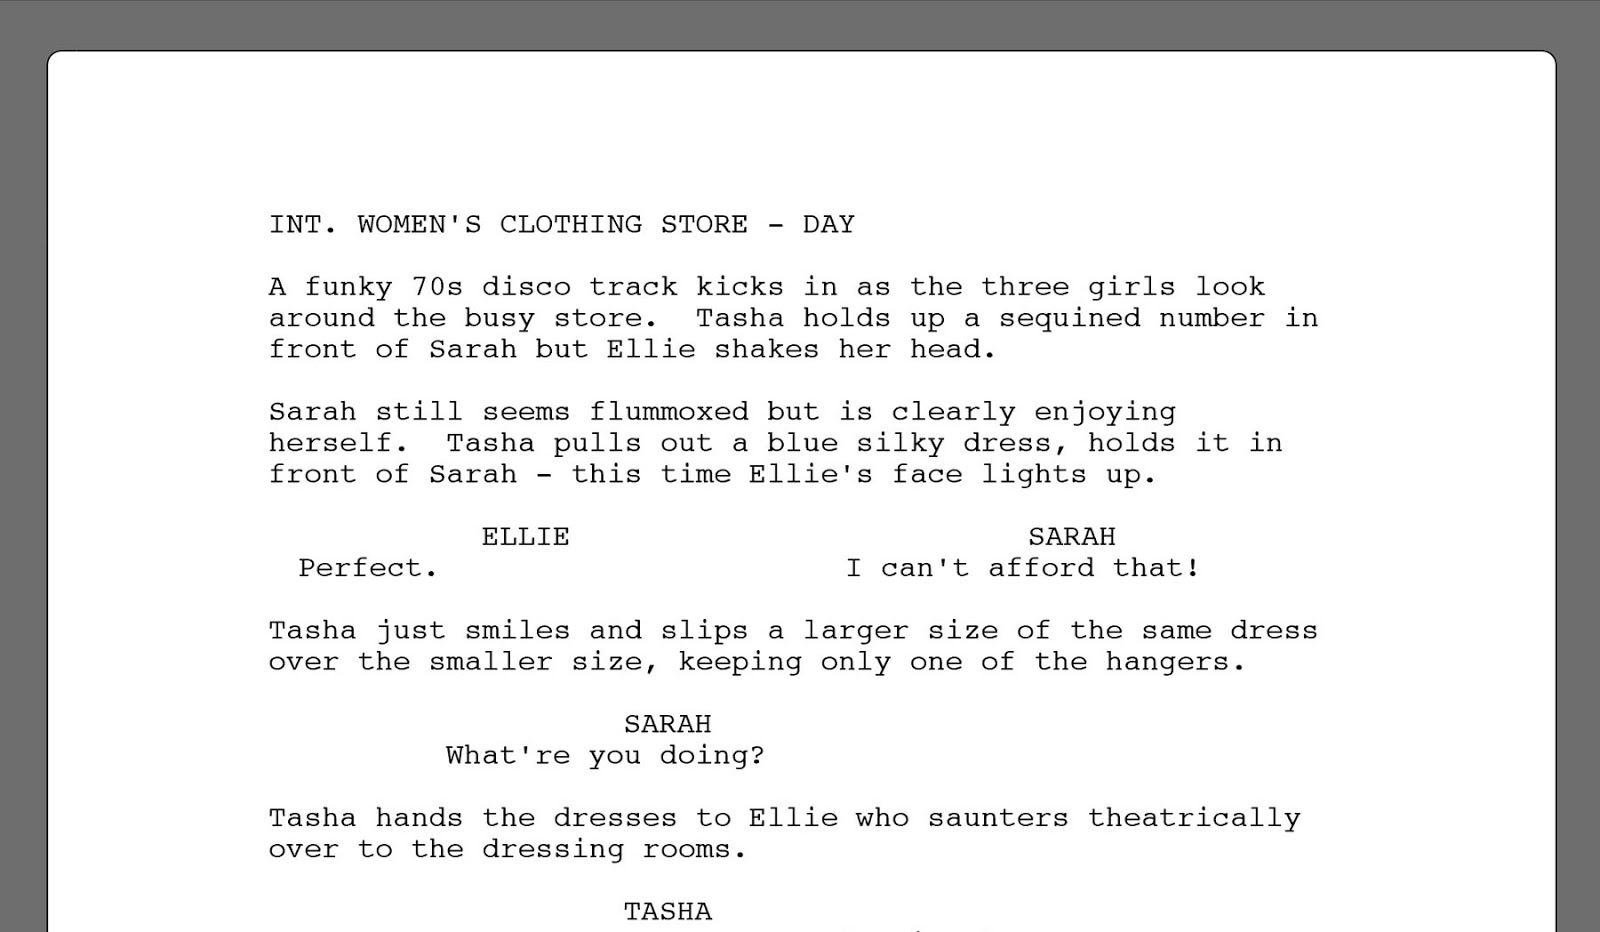 Dumb Dog Productions LLC: HOW TO WRITE MOVIE SCRIPTS – SOME BASICS